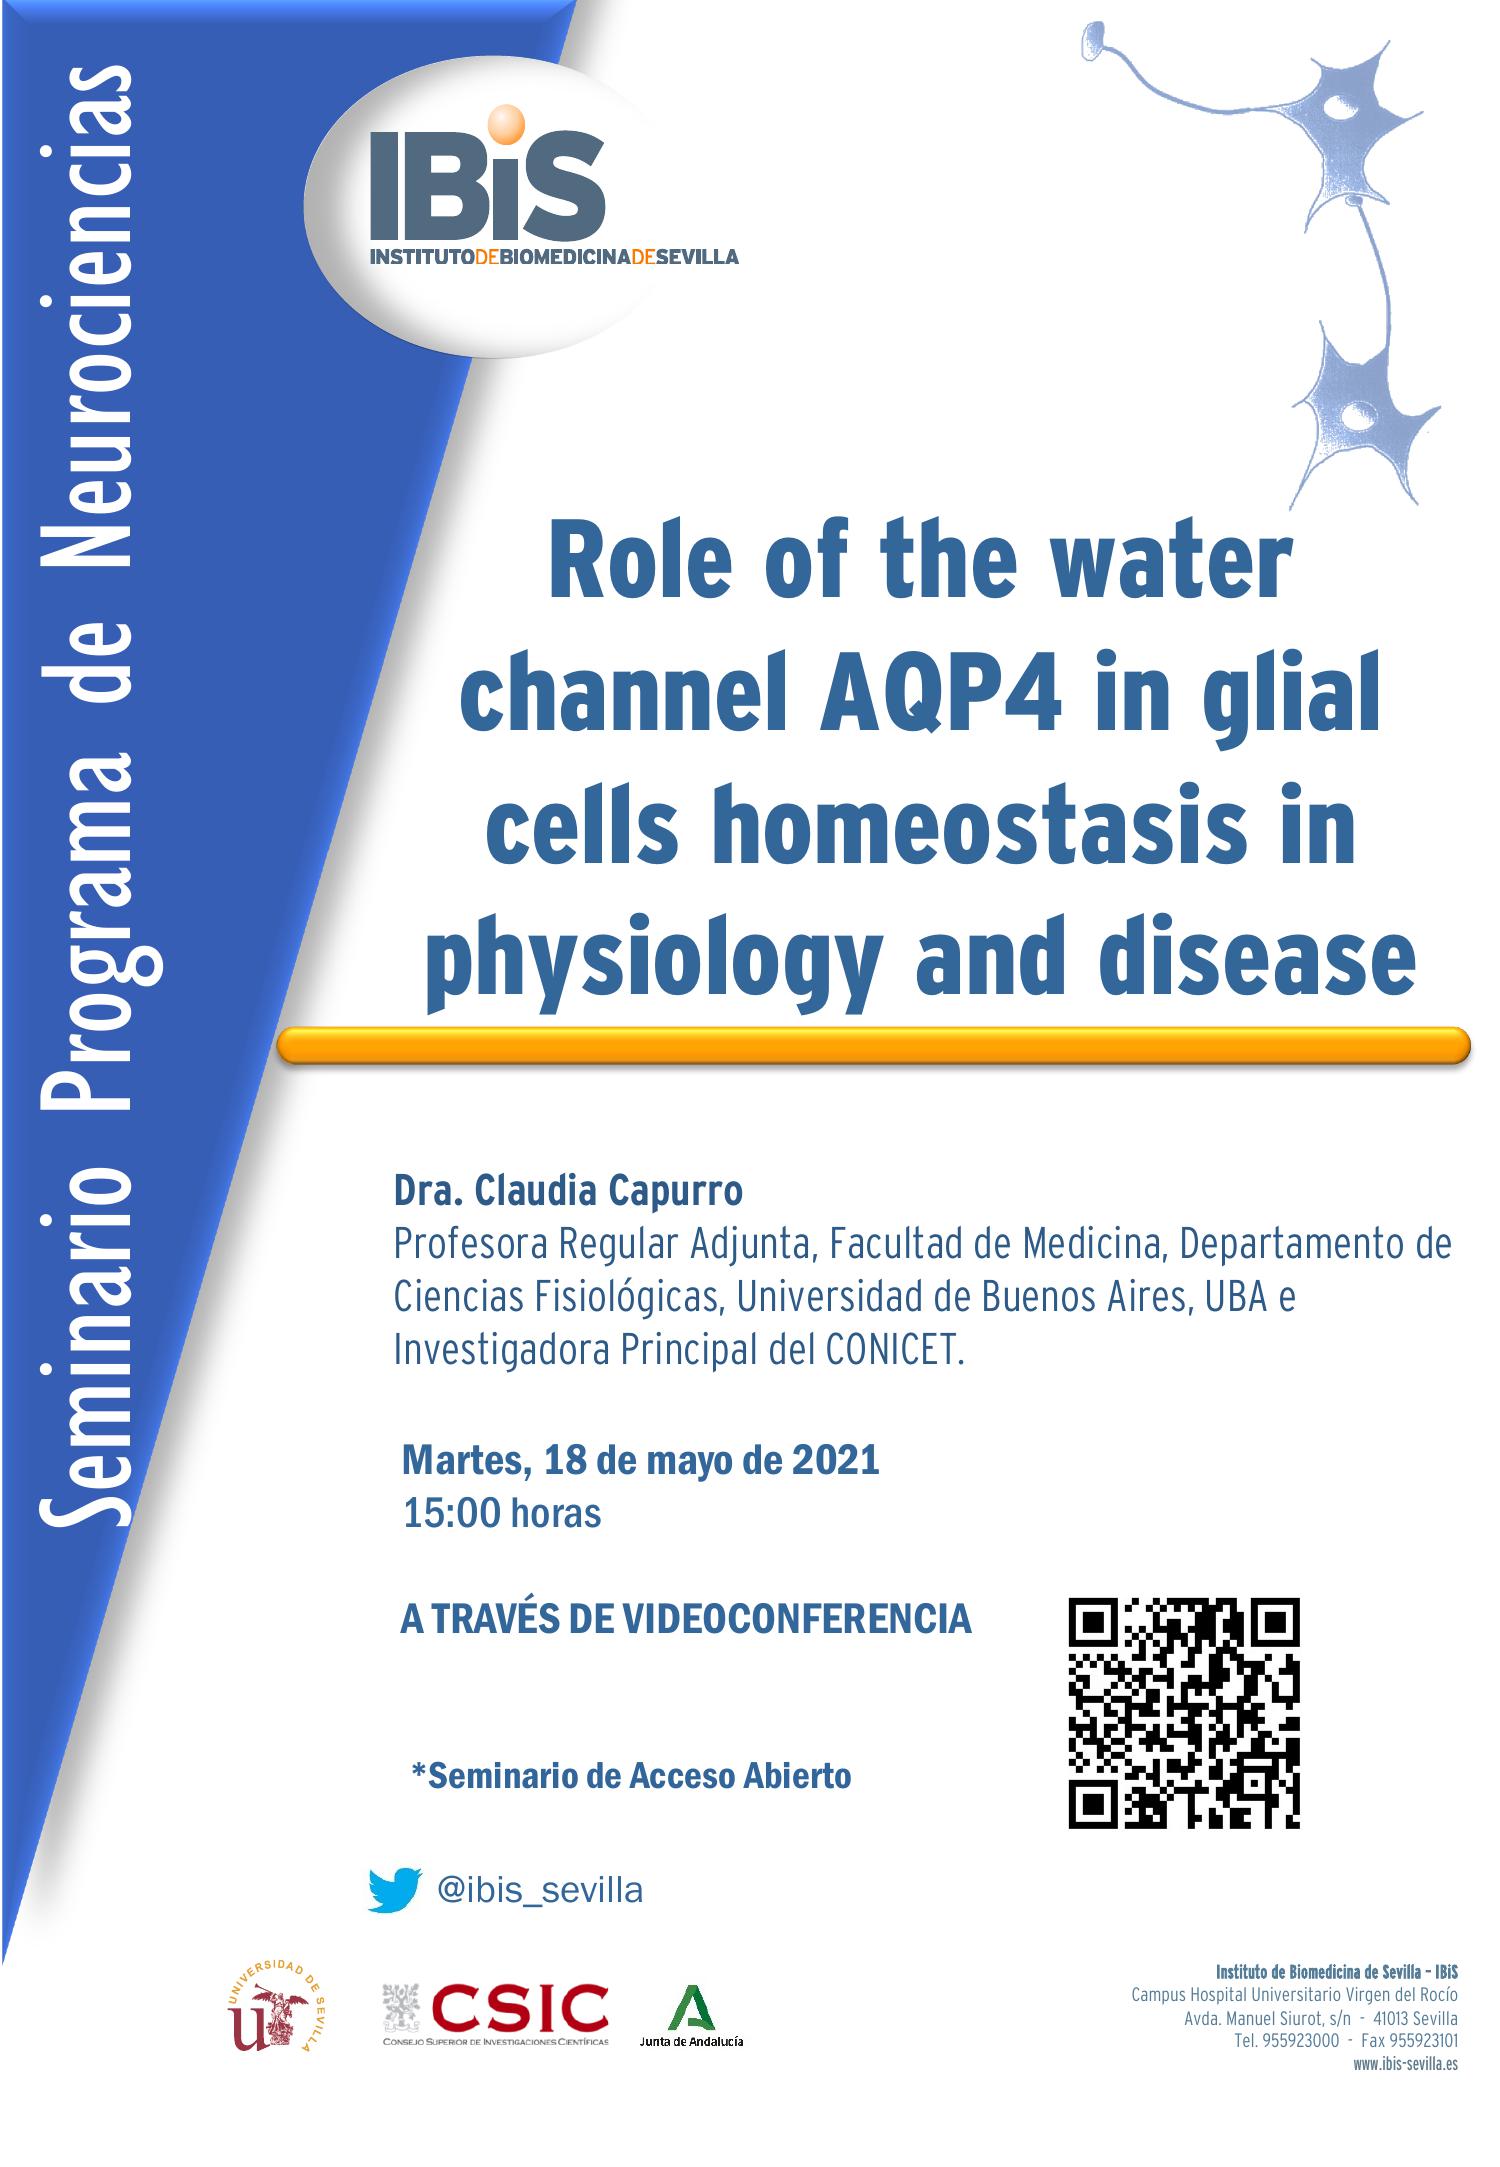 Poster: Role of the water channel AQP4 in glial cells homeostasis in physiology and disease